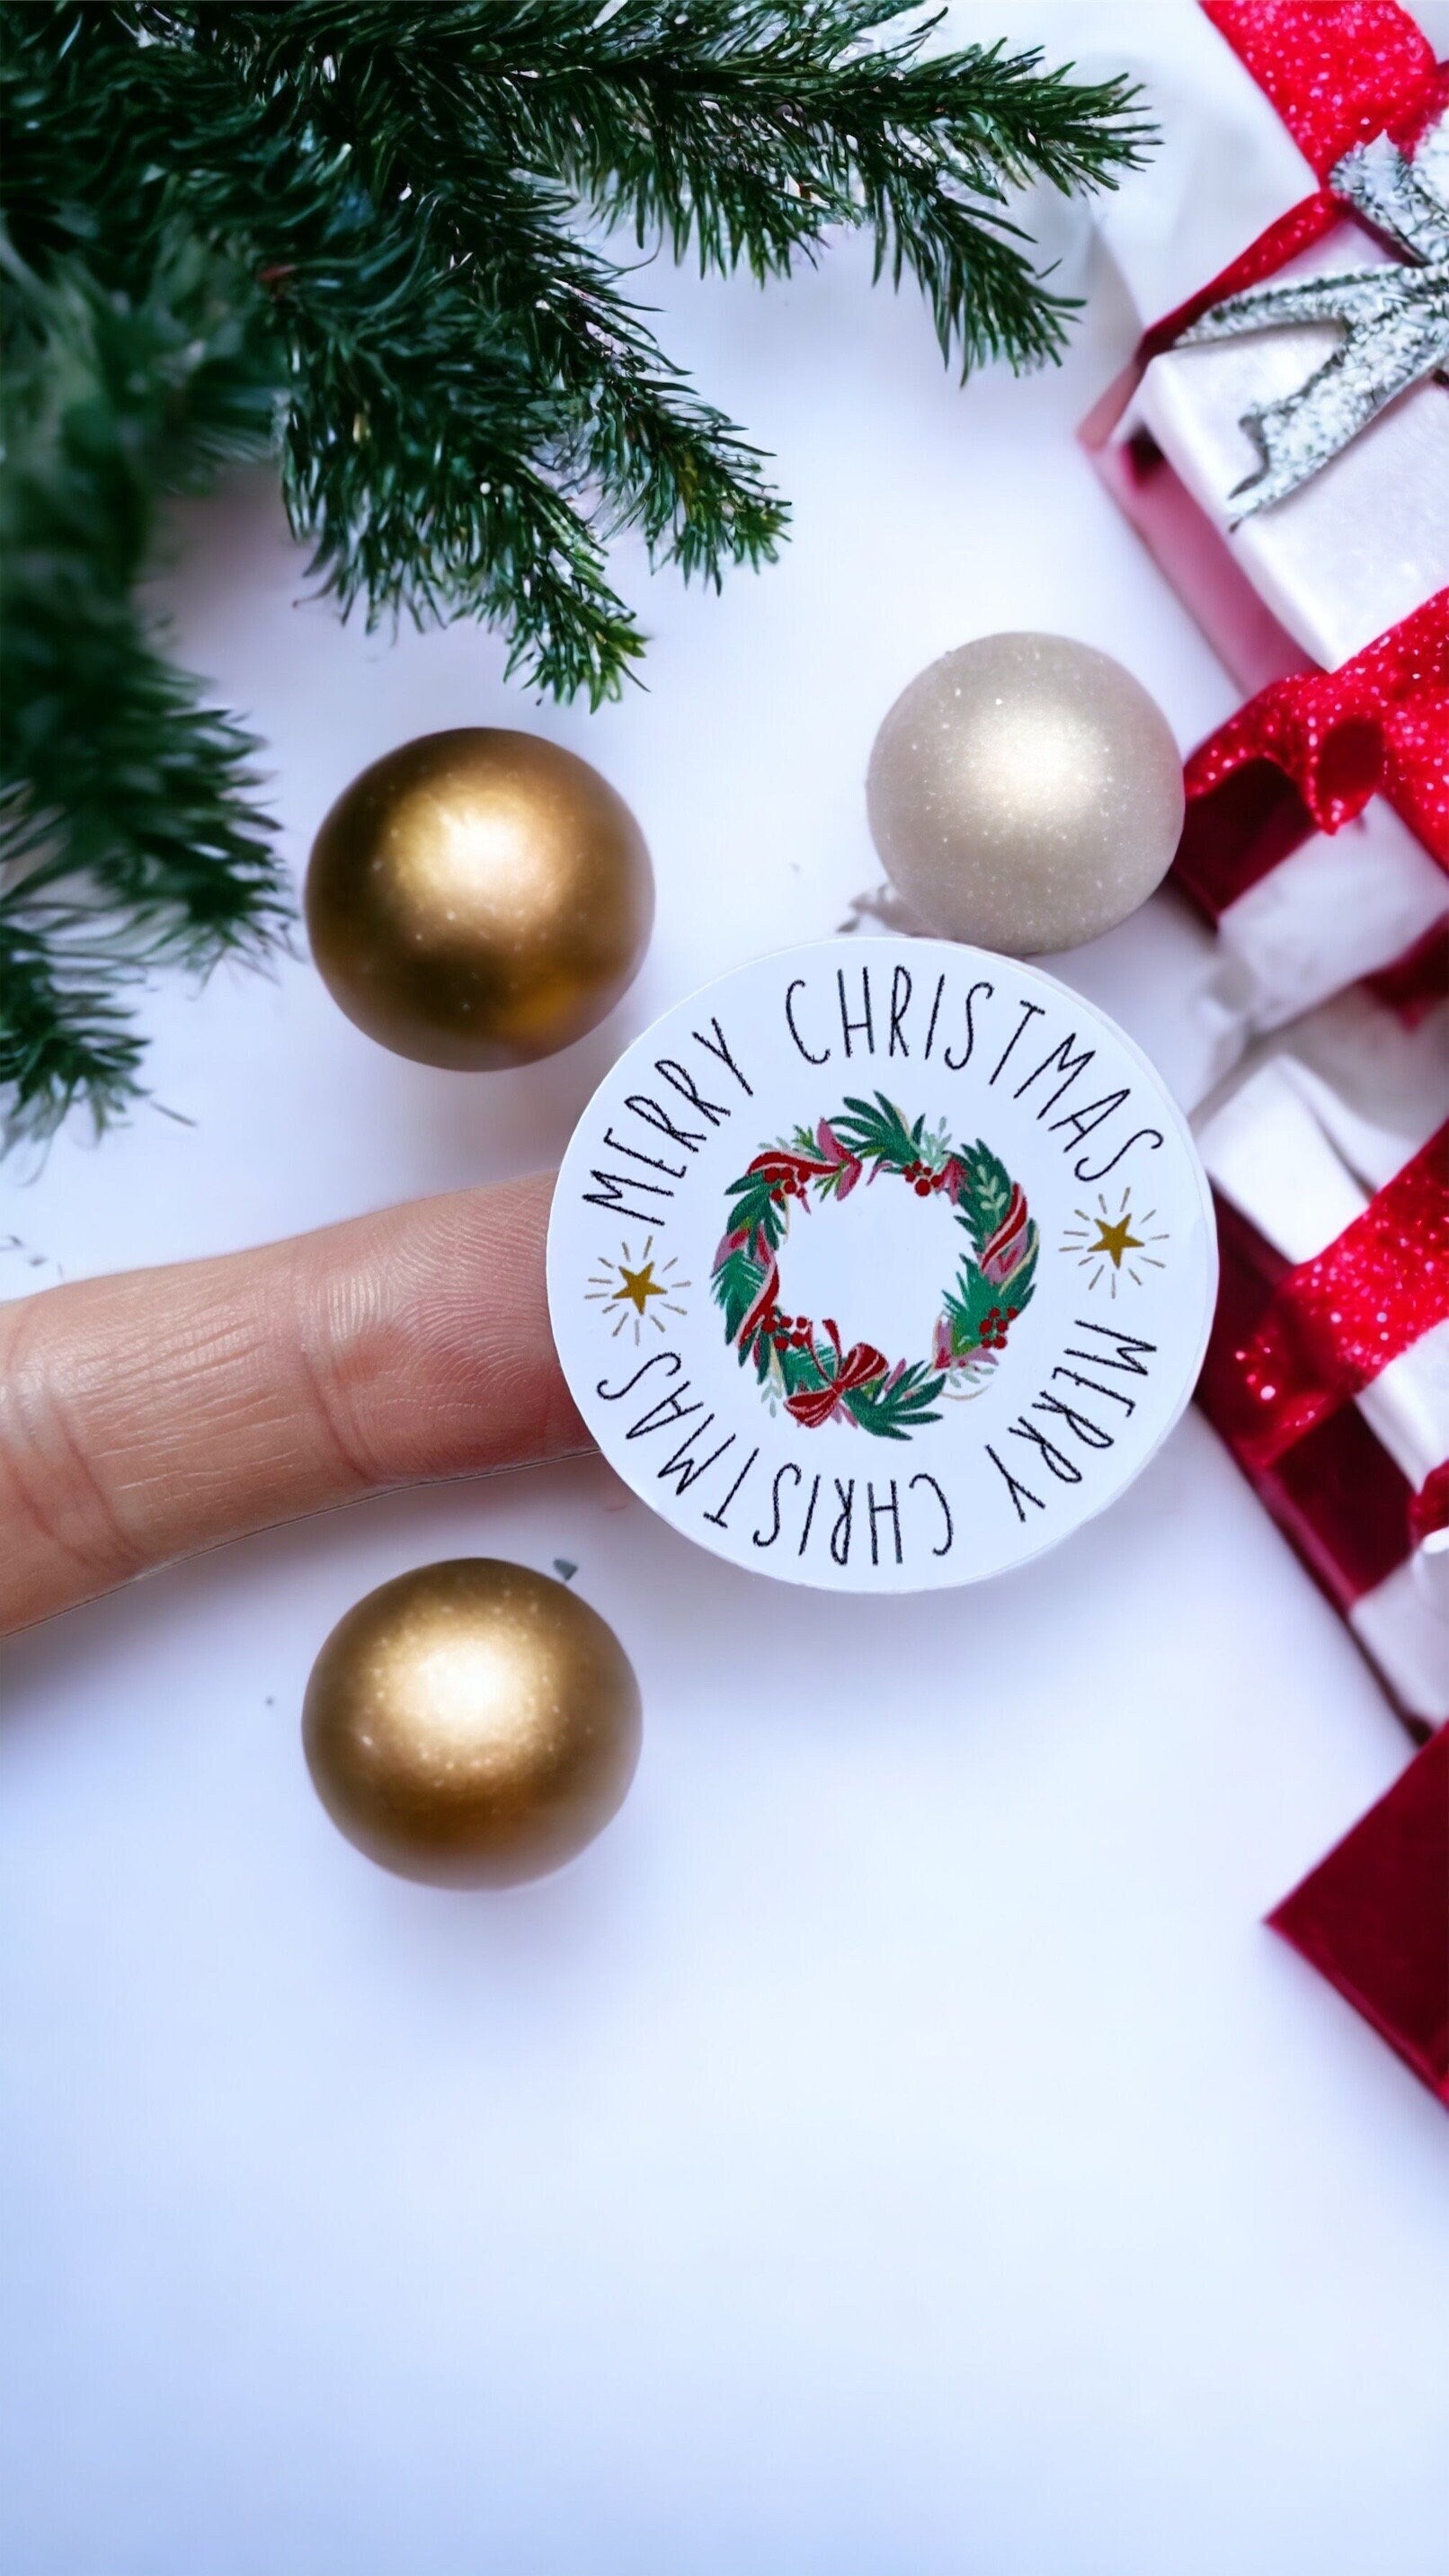 Merry Christmas Wreath Sticker | 38mm Gift Labels | Christmas Stickers | Envelope Seals | Small Business